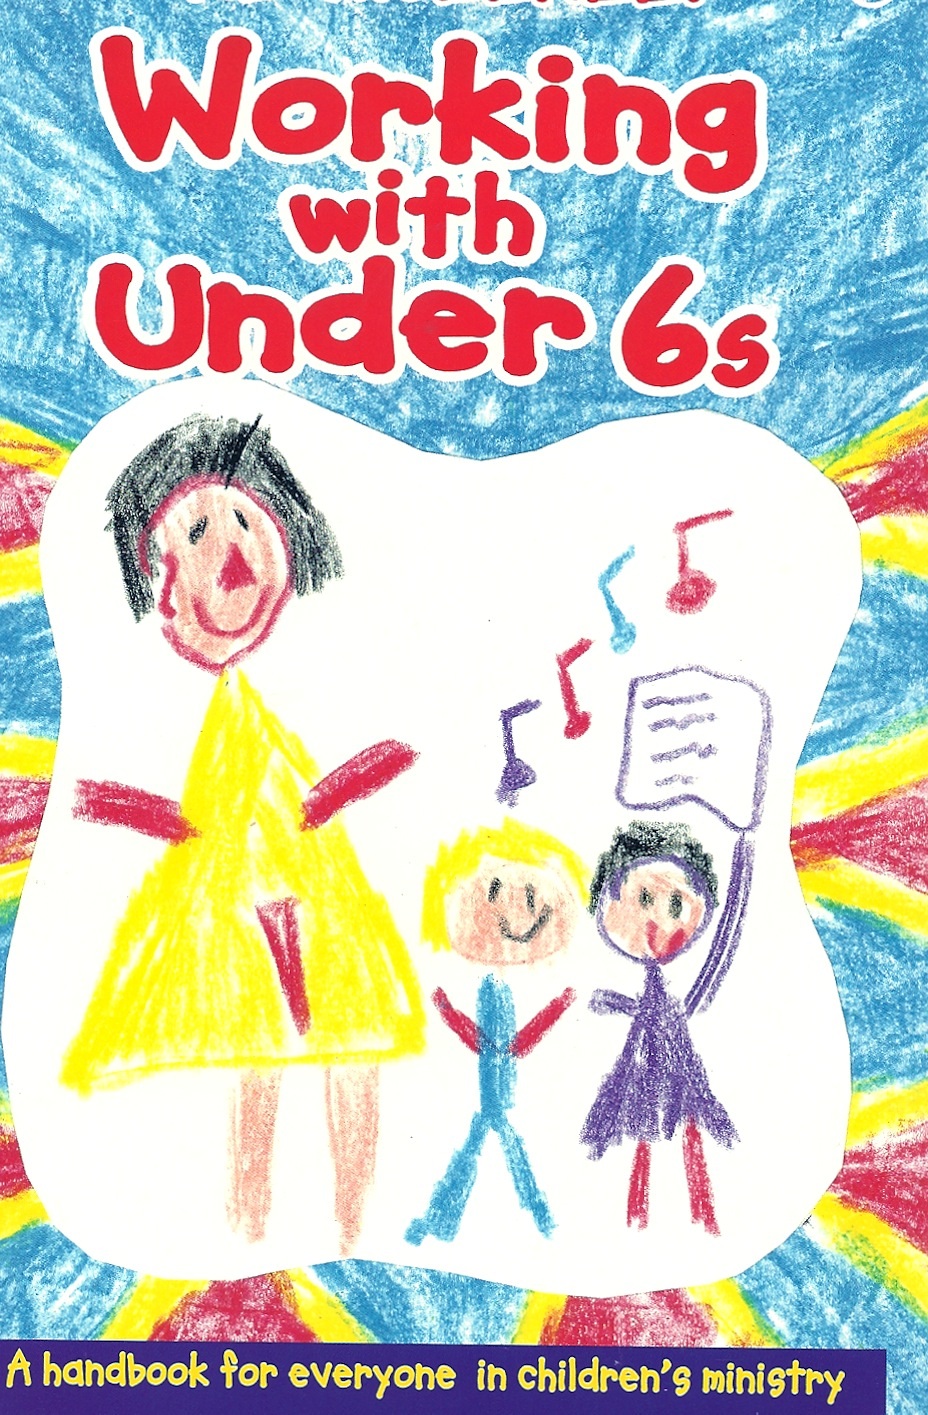 Working with Under 6s: Handbook for Leaders in Children’s Ministry